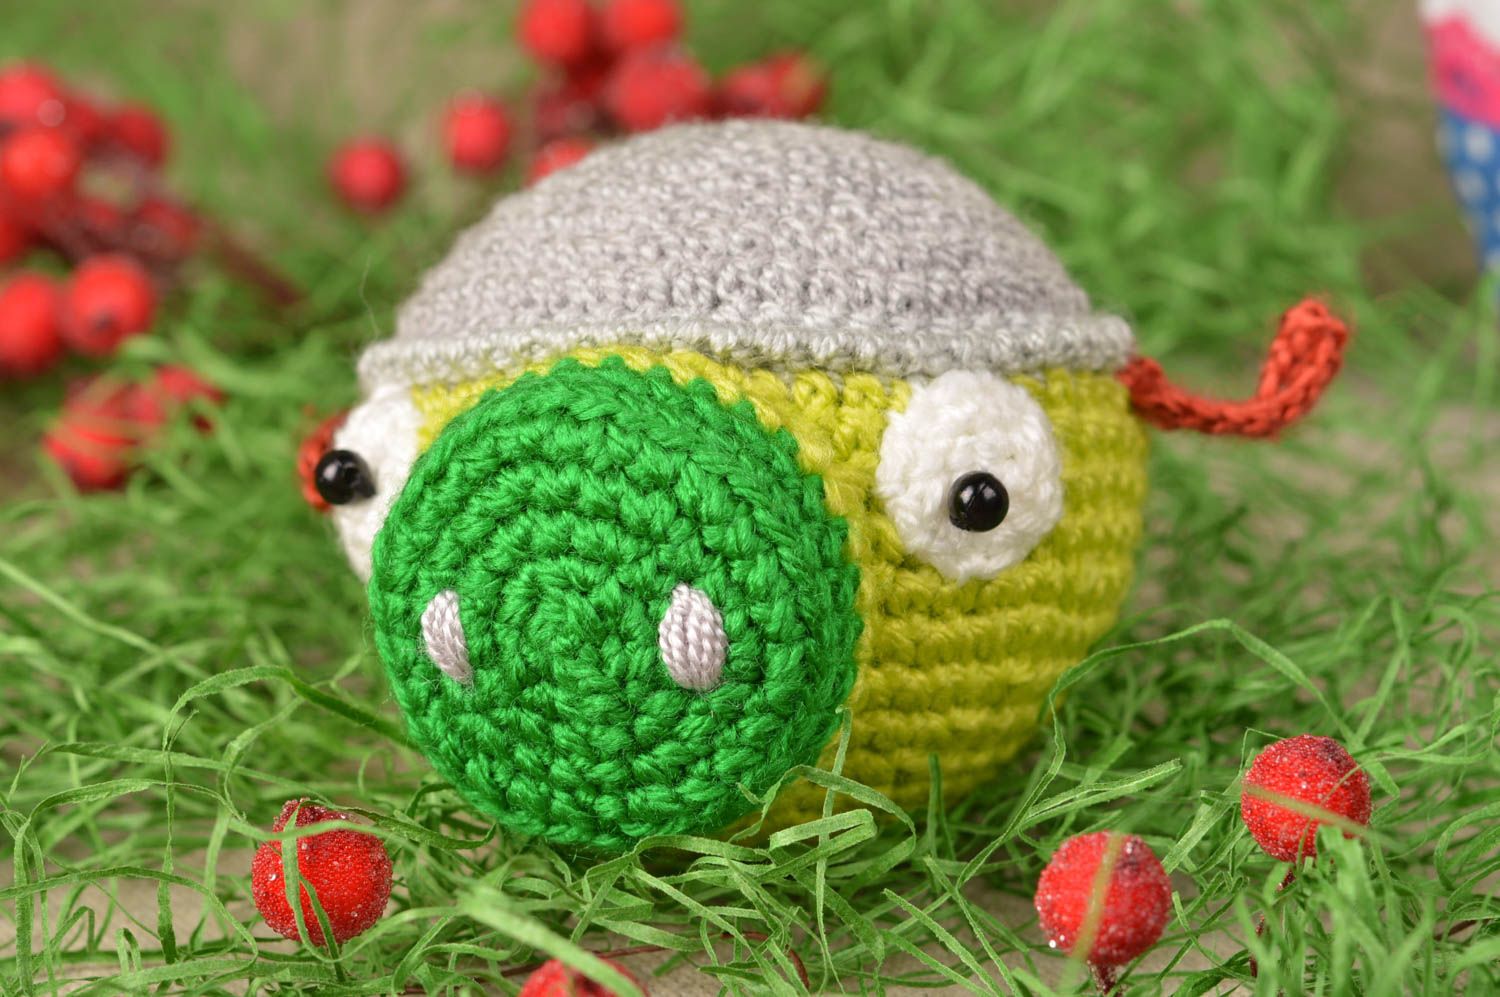 Handmade toy designer toy crocheted toy unusual gift for baby nursery decor photo 1